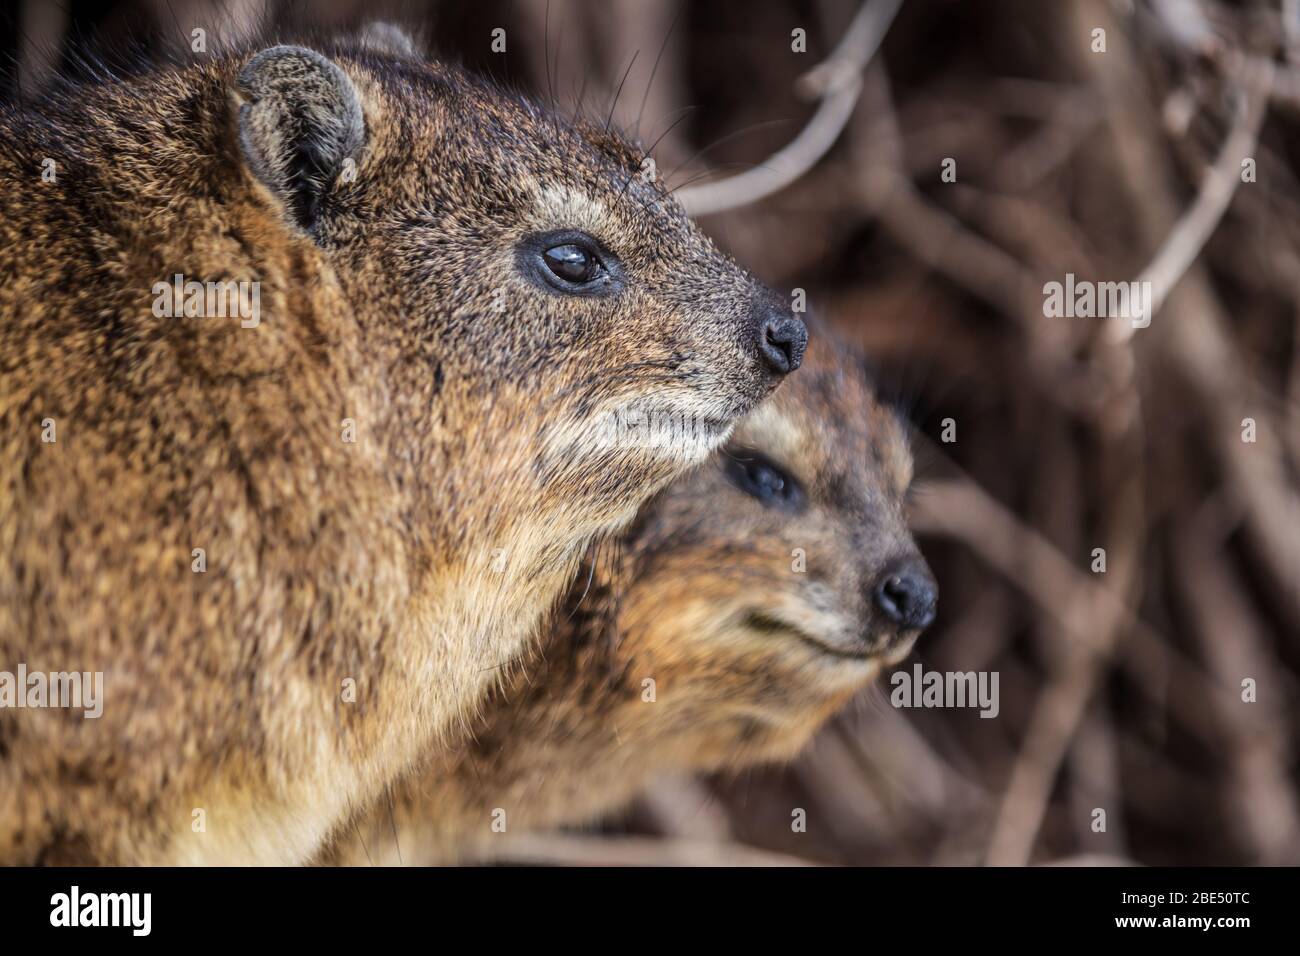 Close-up photo of Hyrax in South Africa Stock Photo